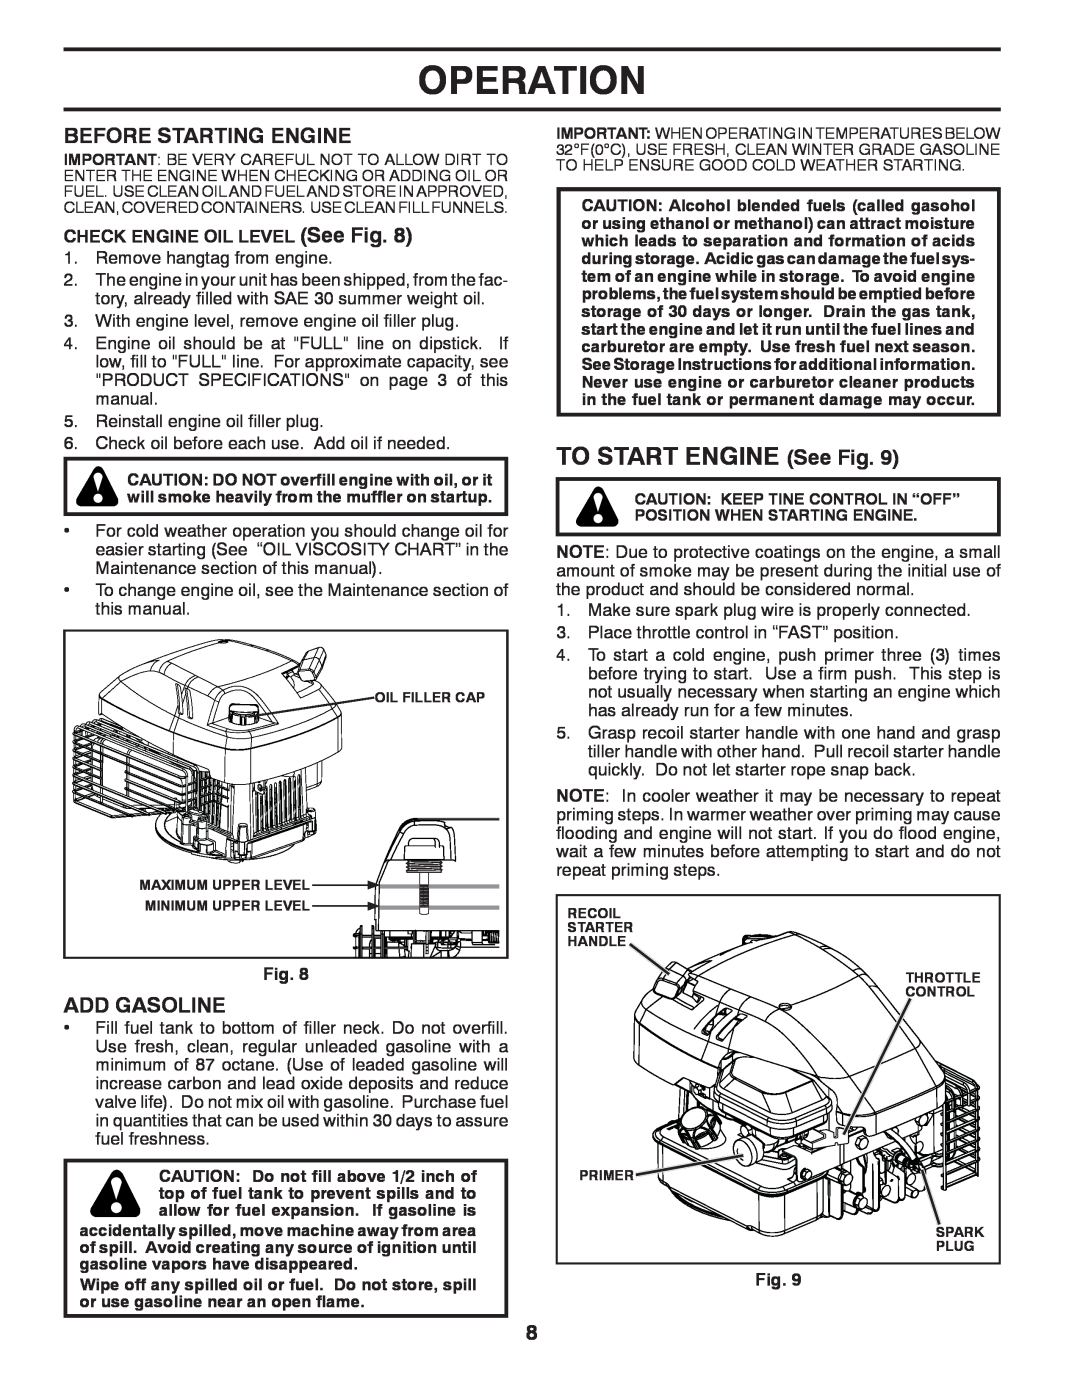 Poulan 433552, VF550, 96082001500 manual TO START ENGINE See Fig, Before Starting Engine, Add Gasoline, Operation 